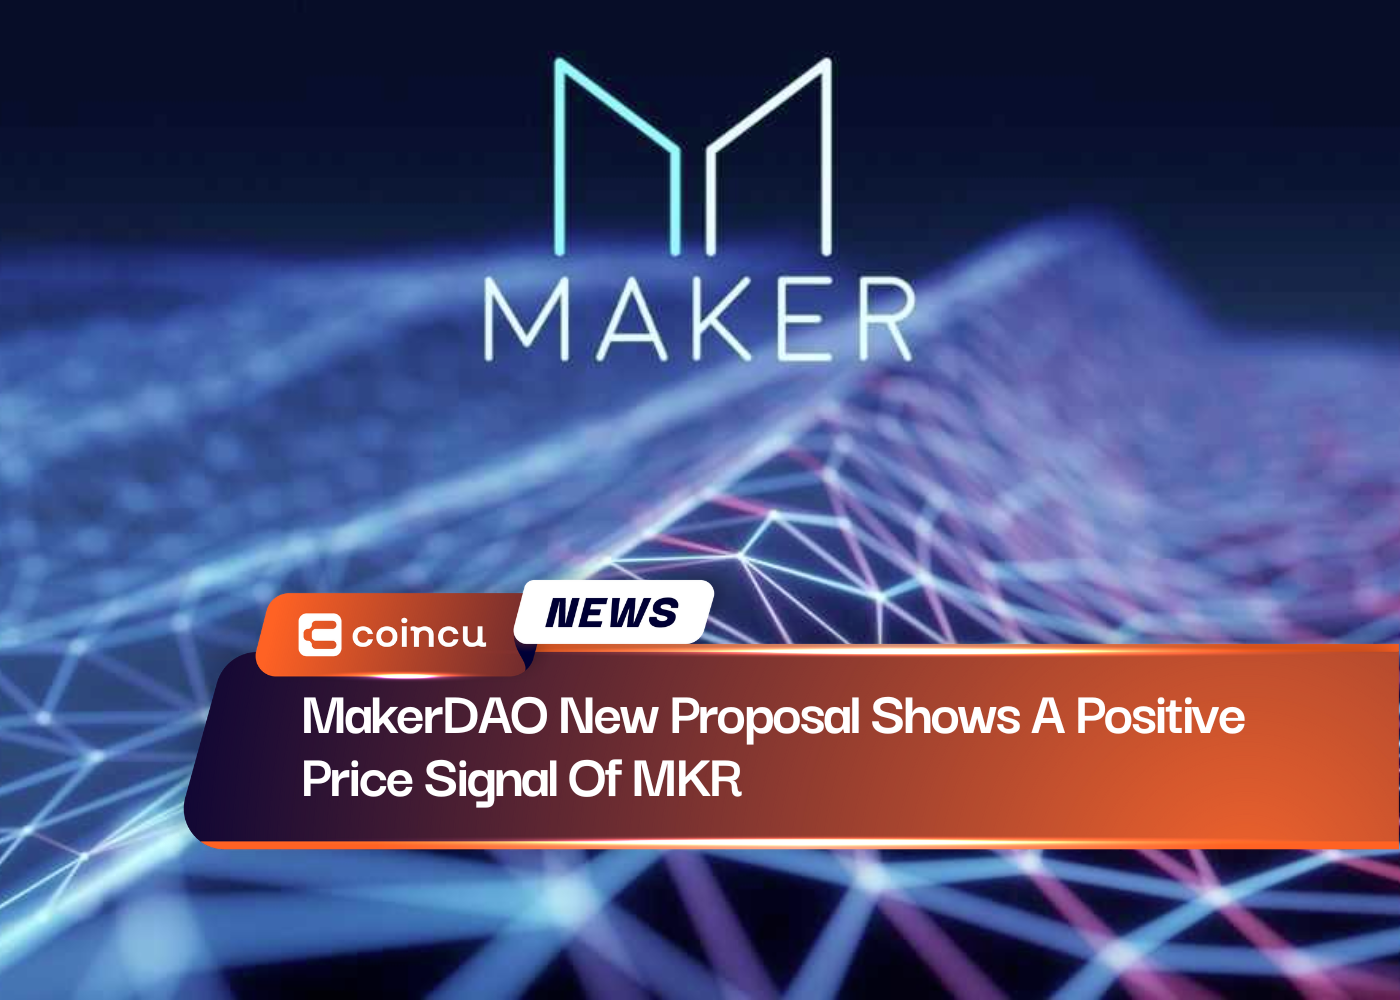 MakerDAO New Proposal Shows A Positive Price Signal Of MKR